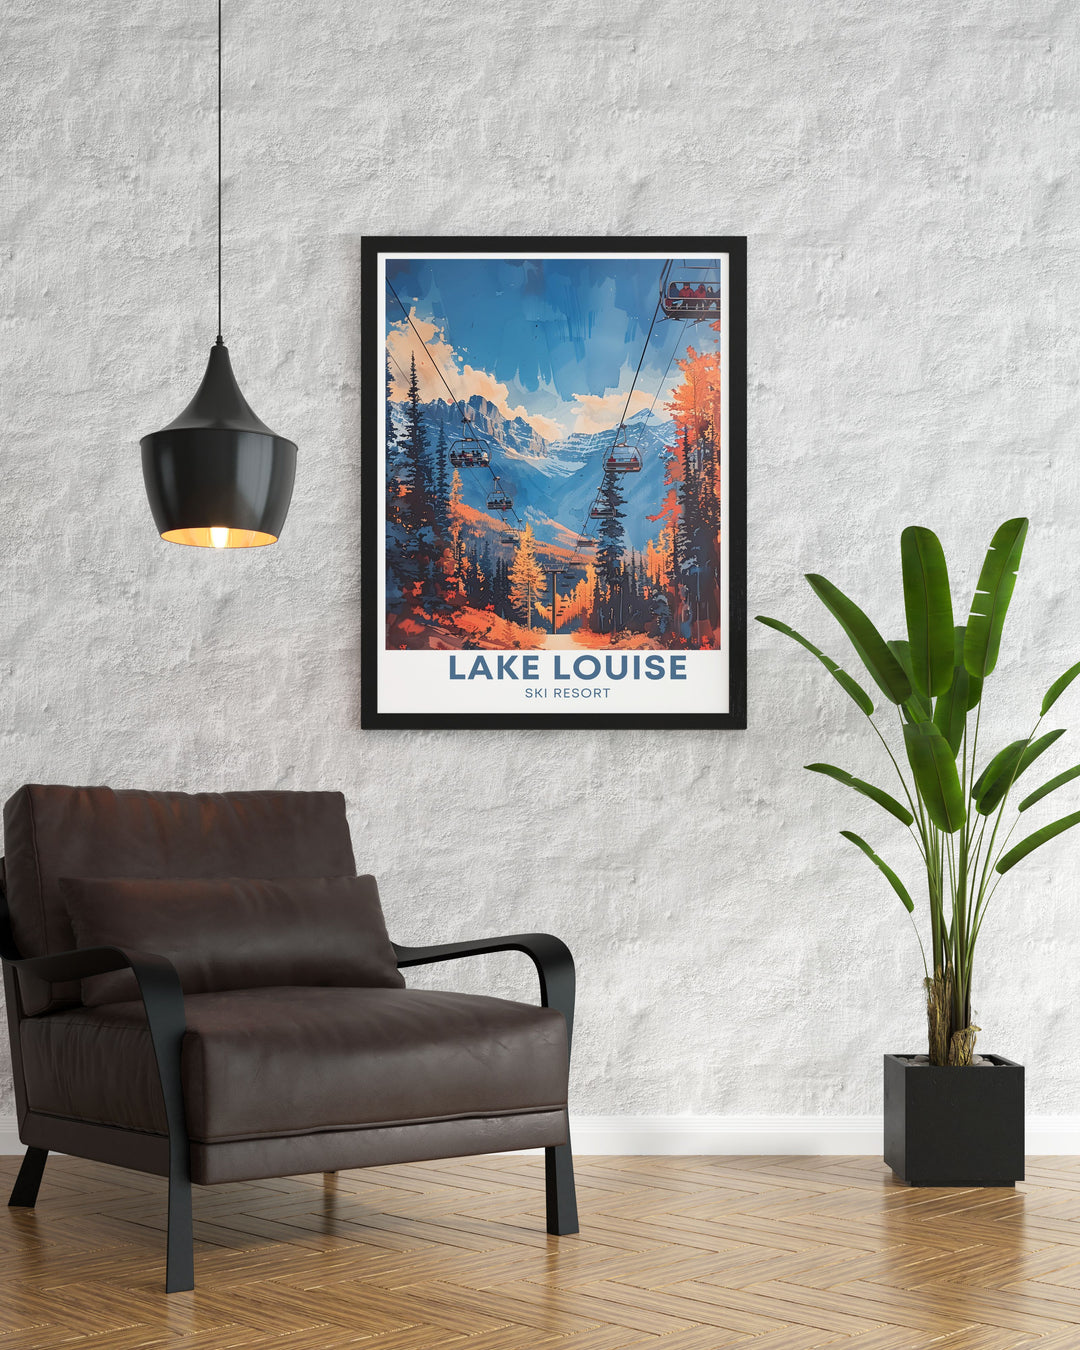 A detailed illustration of Lake Louise Ski Resort in Canada, showcasing the pristine slopes and surrounding Rocky Mountains, highlighting the natural beauty and thrilling ski experiences available at this world renowned destination.